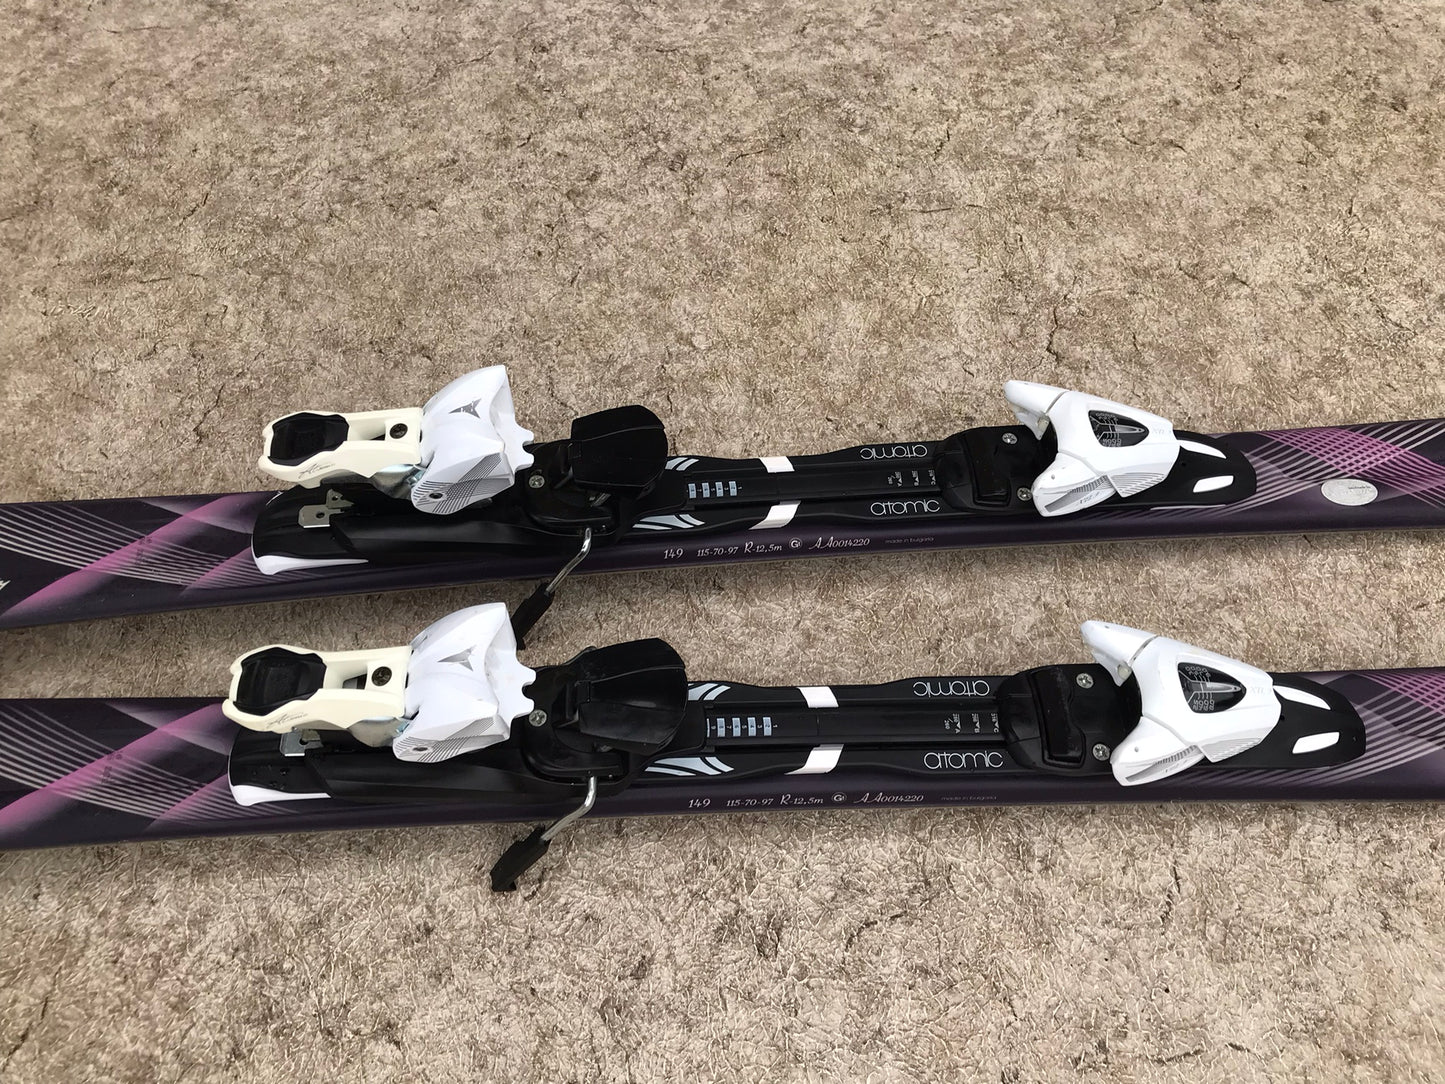 Ski 149 Atomic Cloud 7 Parabolic With Bindings Excellent